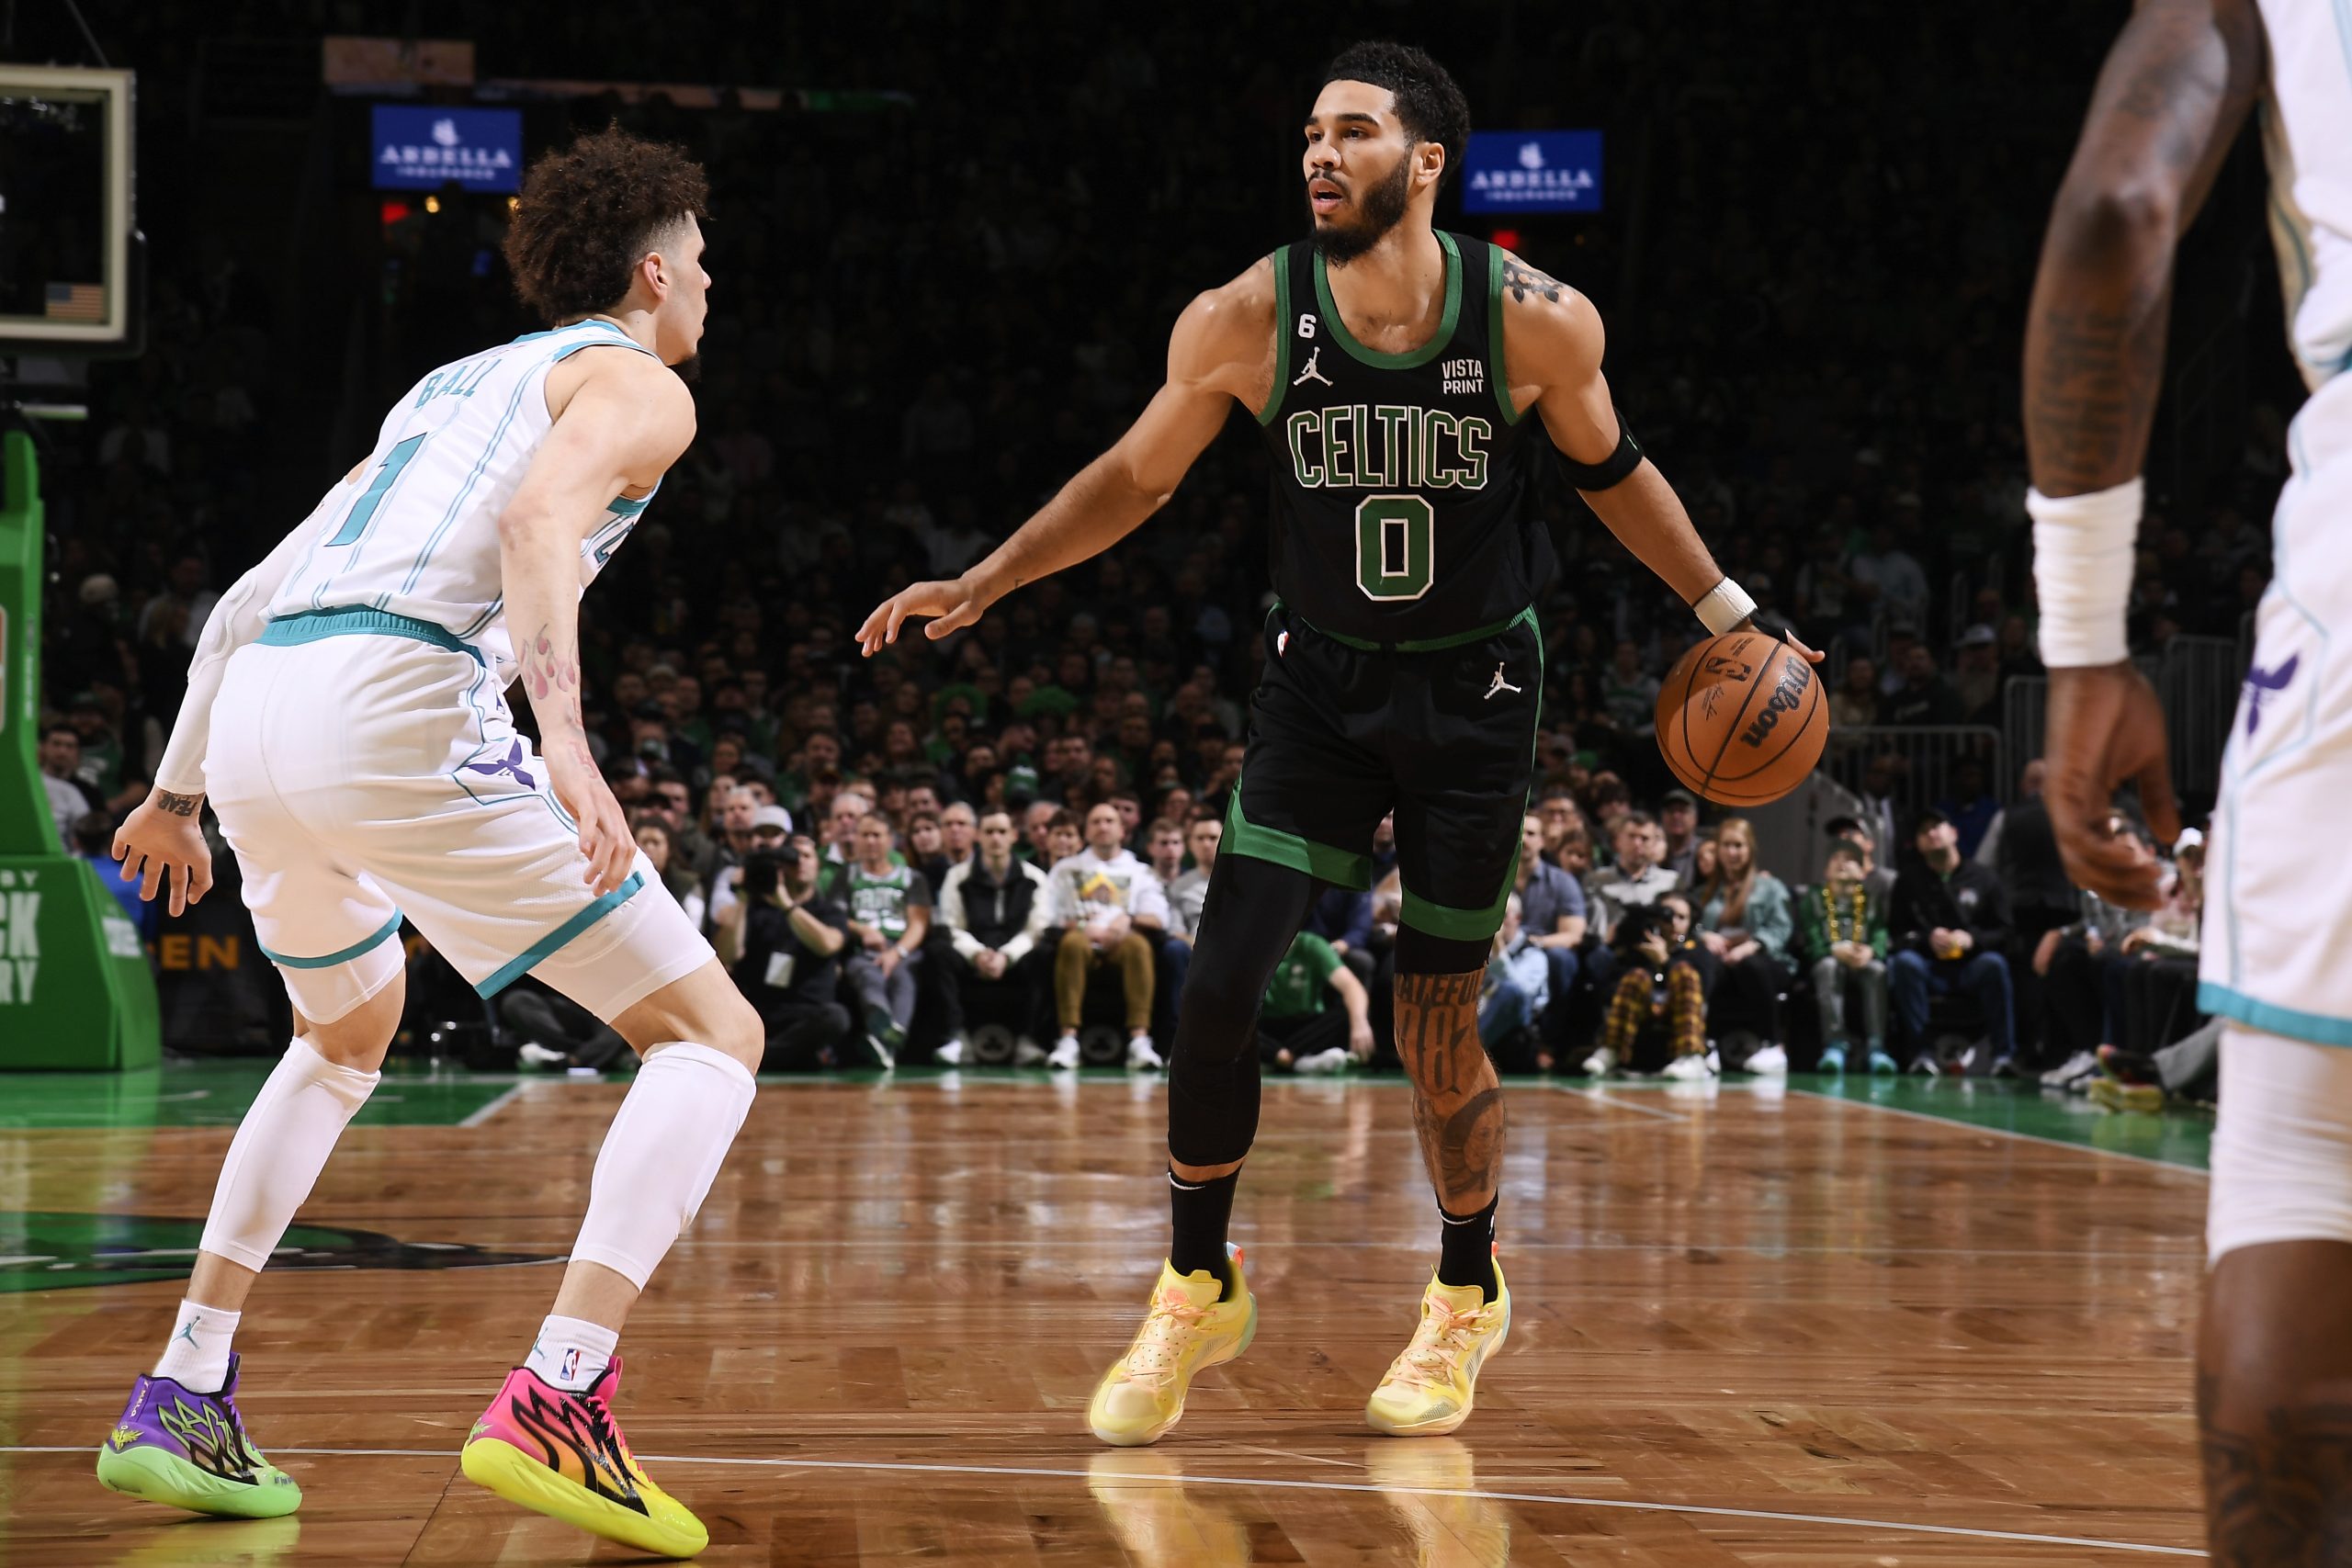 Jayson Tatum's Game is Already Otherworldly, but He's Just Getting Started